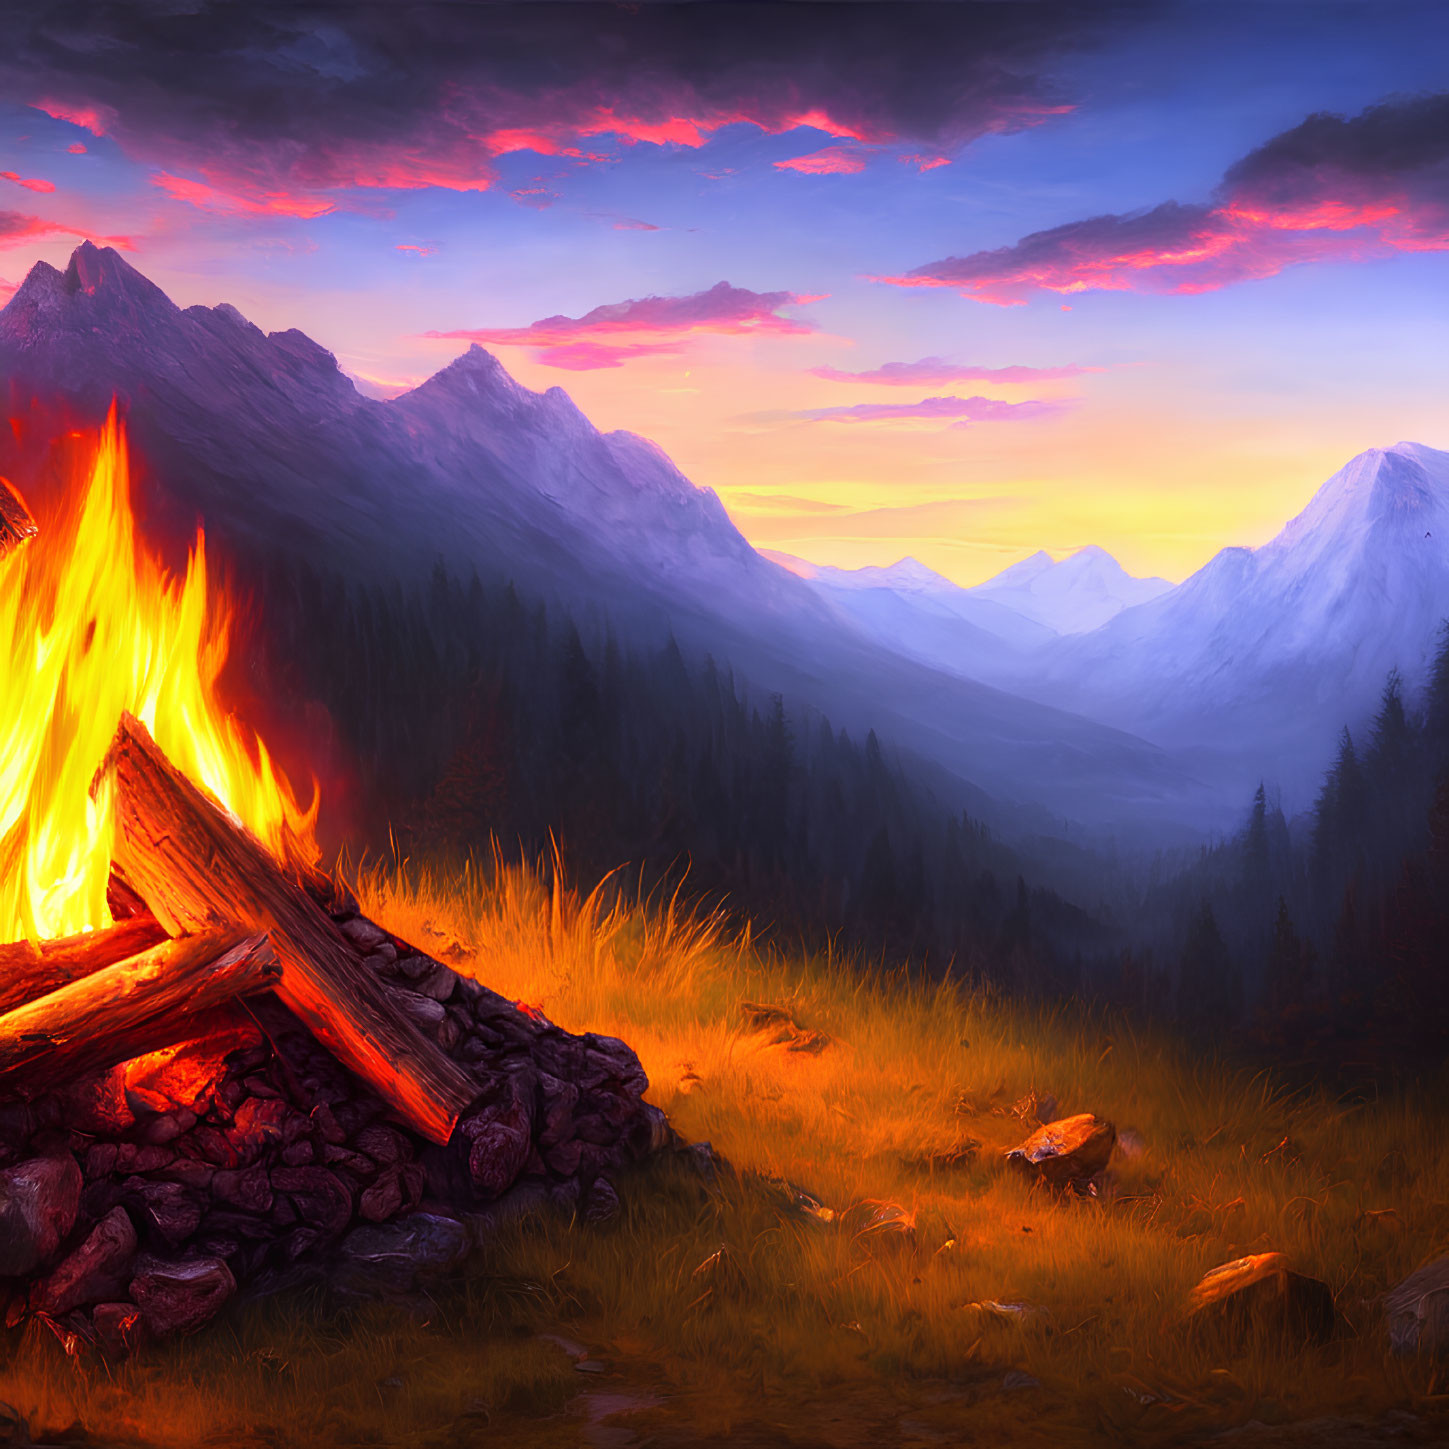 Colorful Campfire Scene with Dancing Flames and Majestic Mountains at Dusk